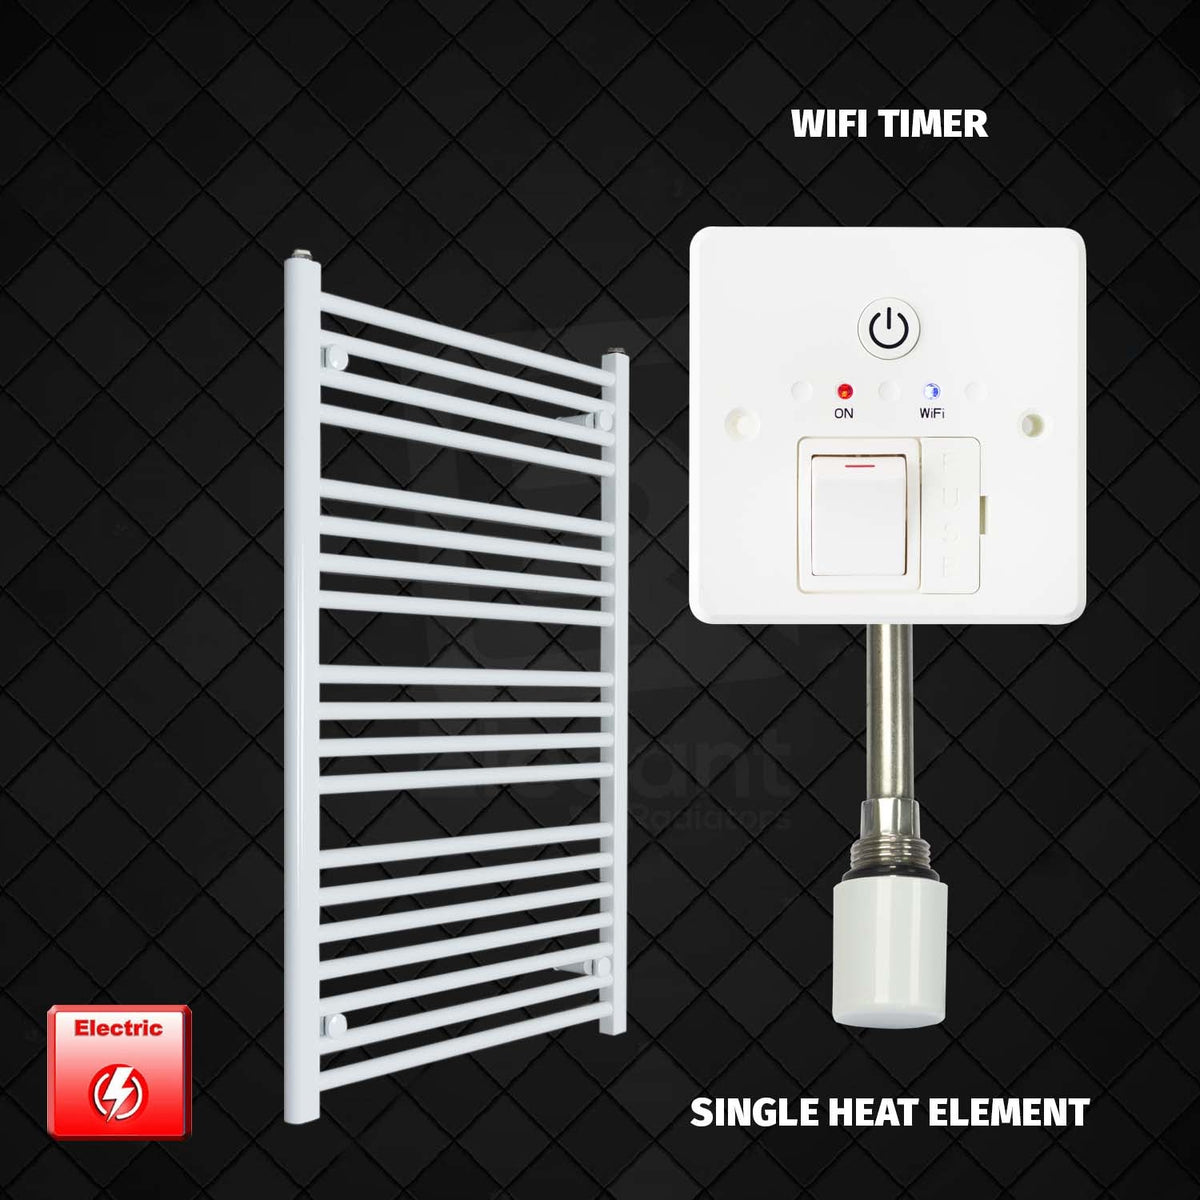 1000 x 700 Pre-Filled Electric Heated Towel Radiator White HTR Single heat element Wifi timer